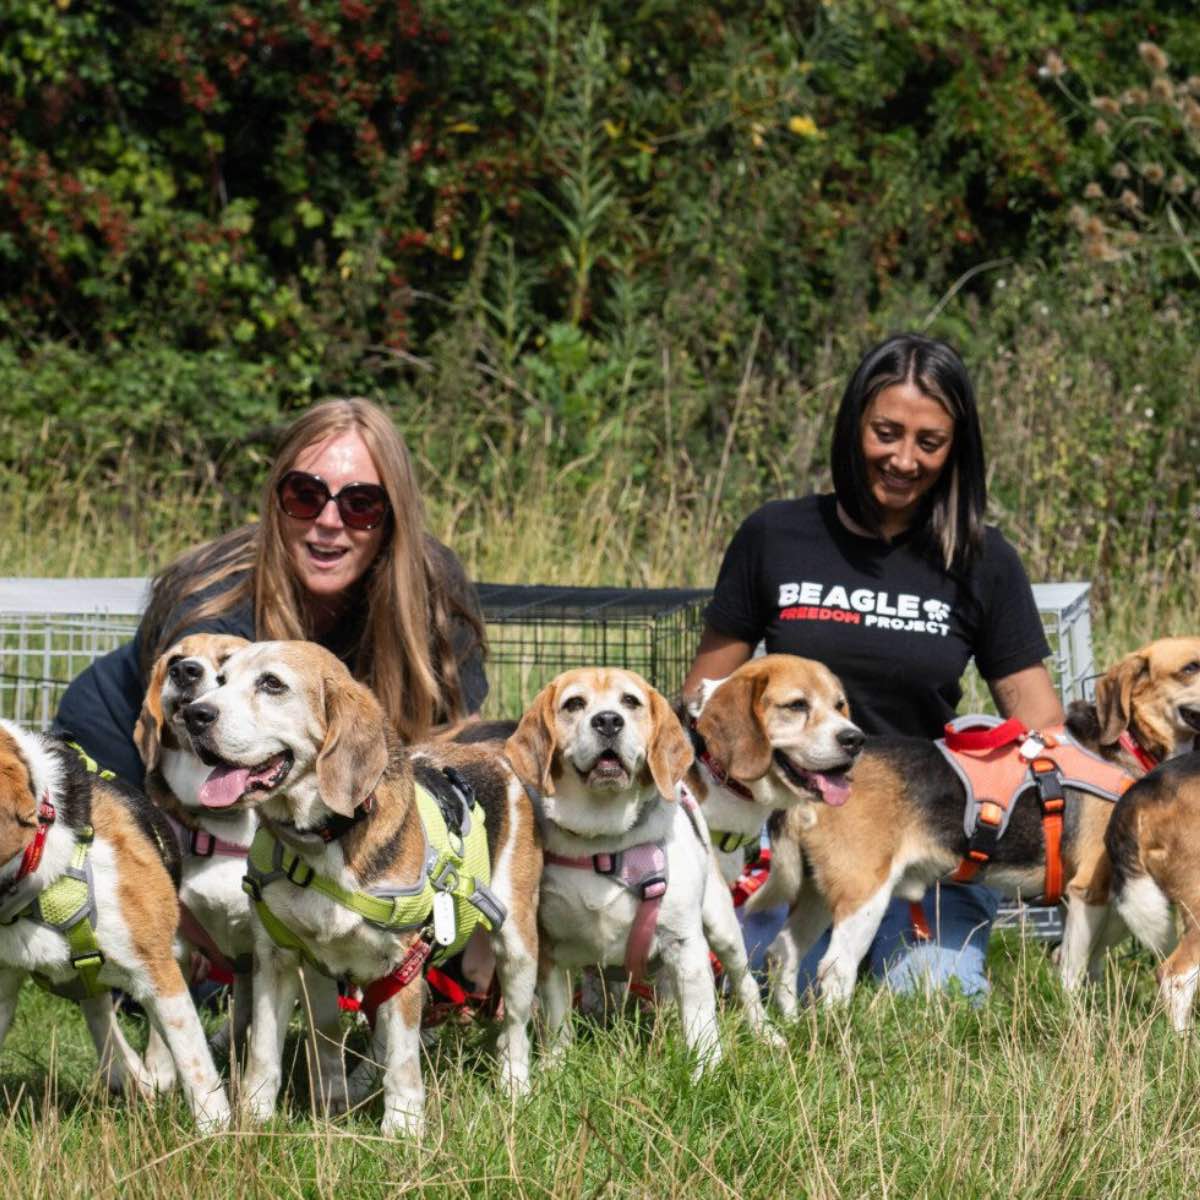 A group of beagles rescued by Beagle Freedom Project happily romping in the grass. 